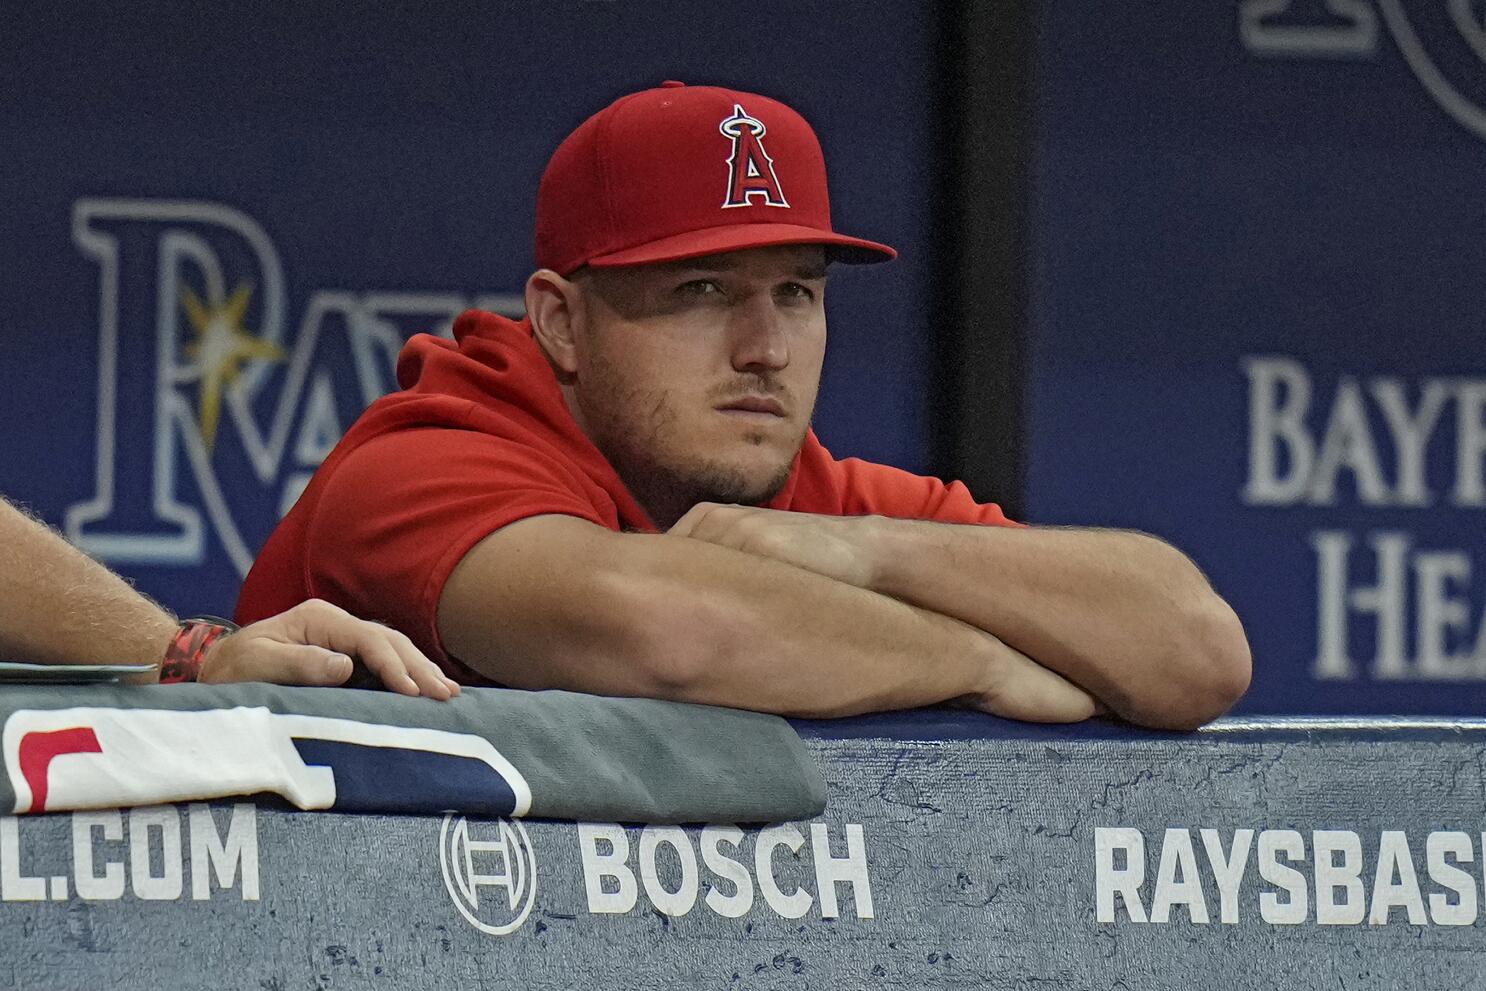 Injured Angels star Mike Trout accompanies team on final road trip